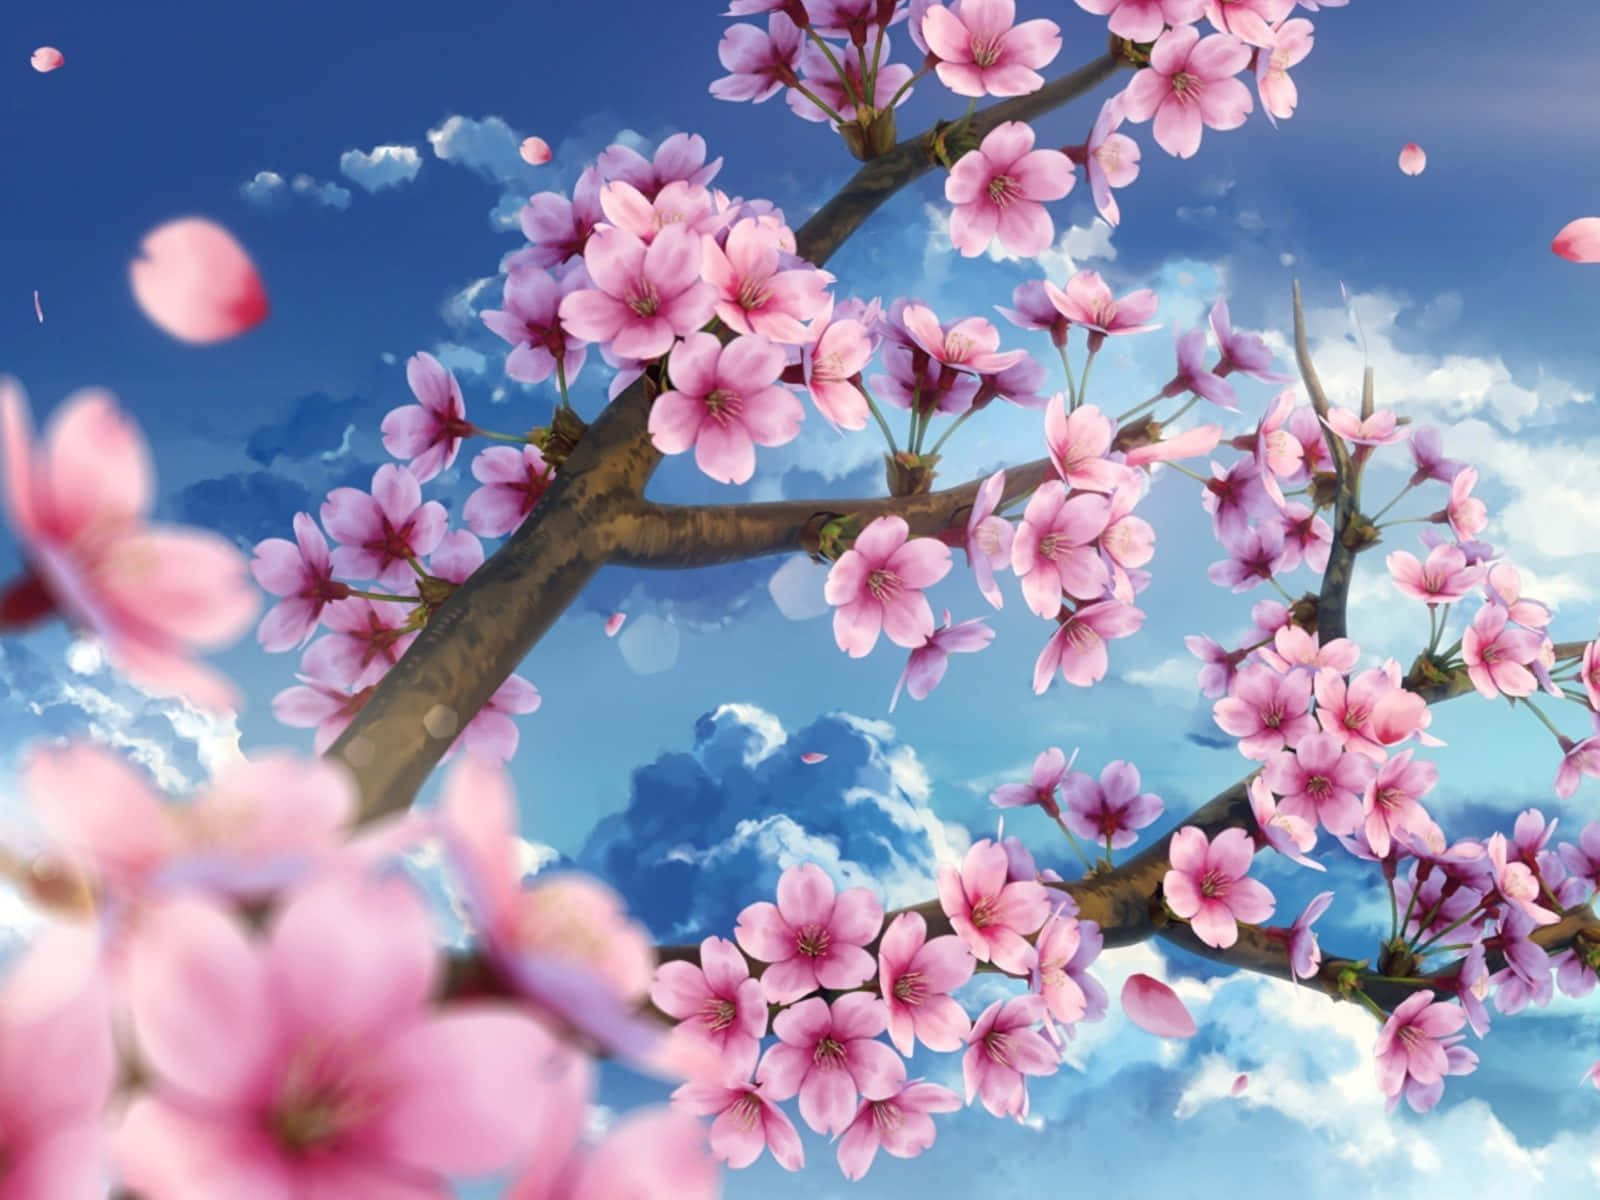 a branch with pink flowers in the sky